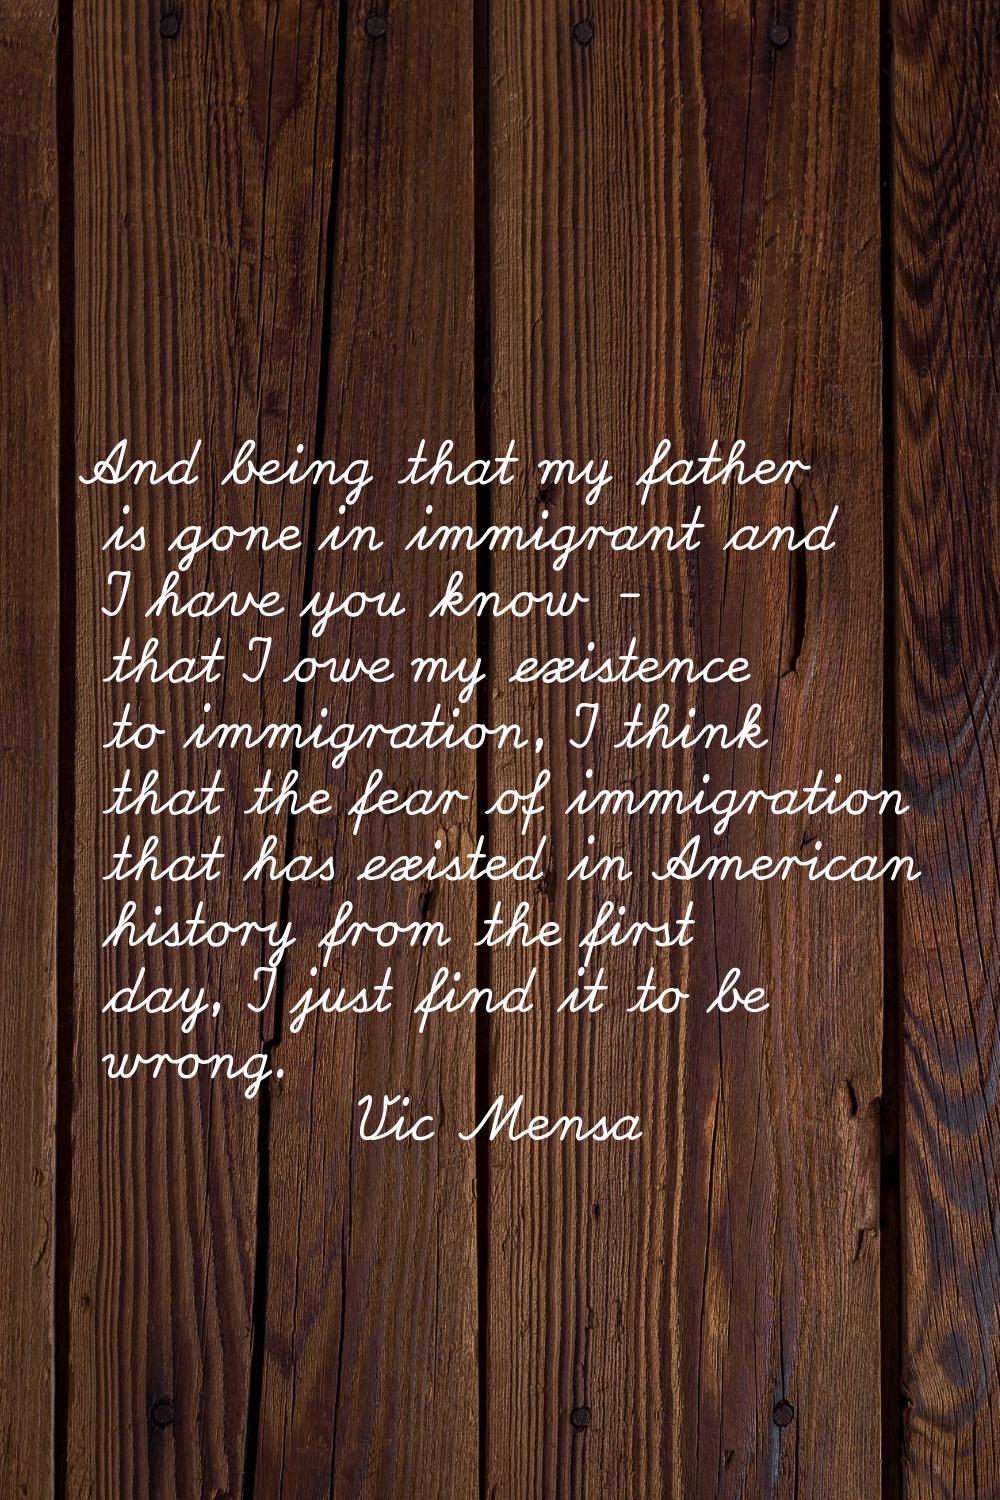 And being that my father is gone in immigrant and I have you know - that I owe my existence to immi